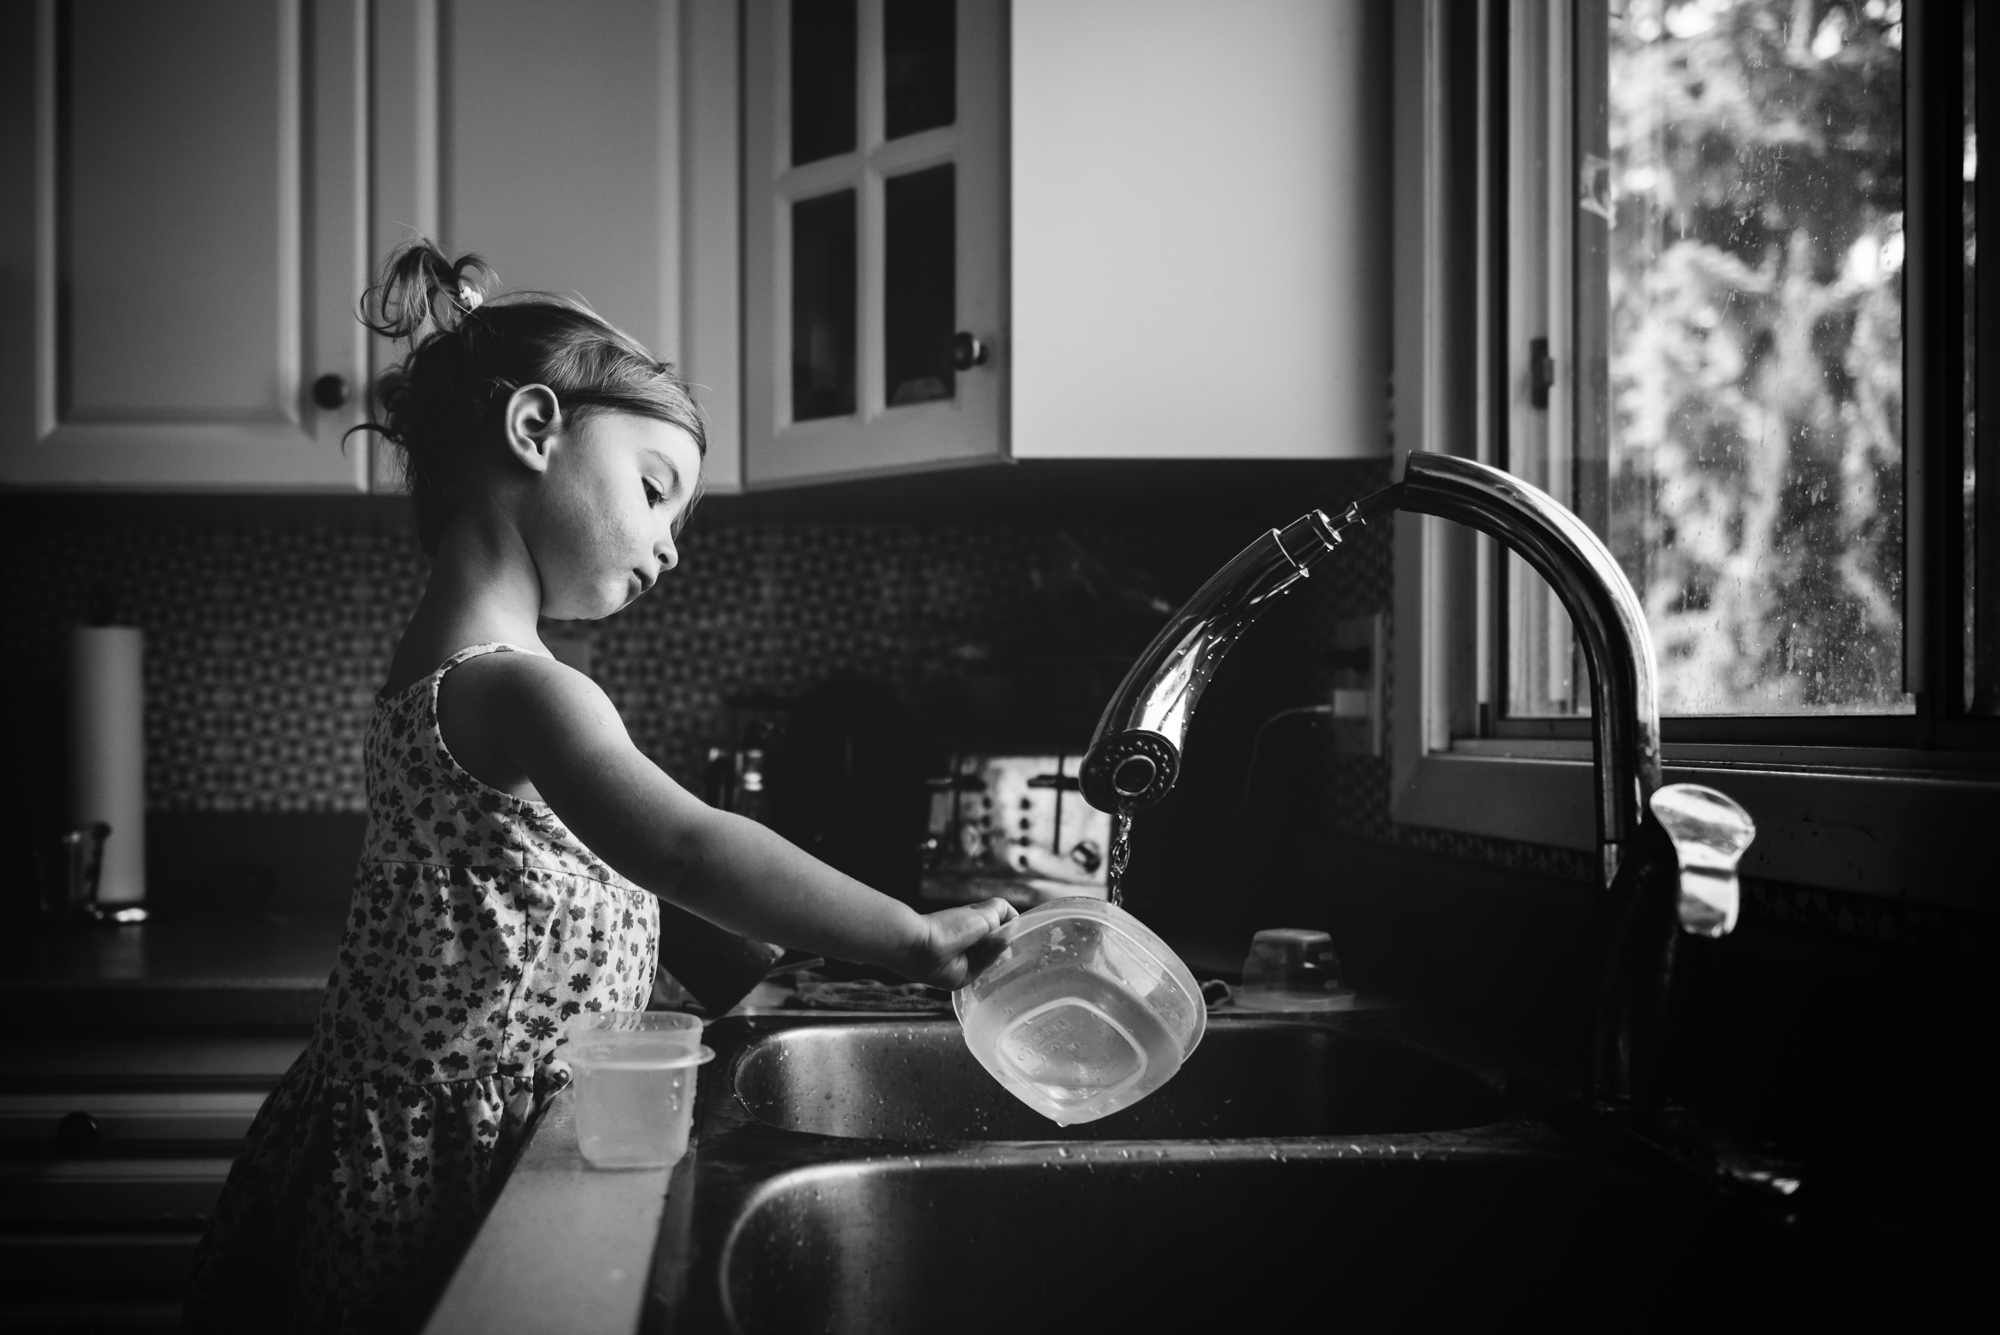 A little girl plays in the sink